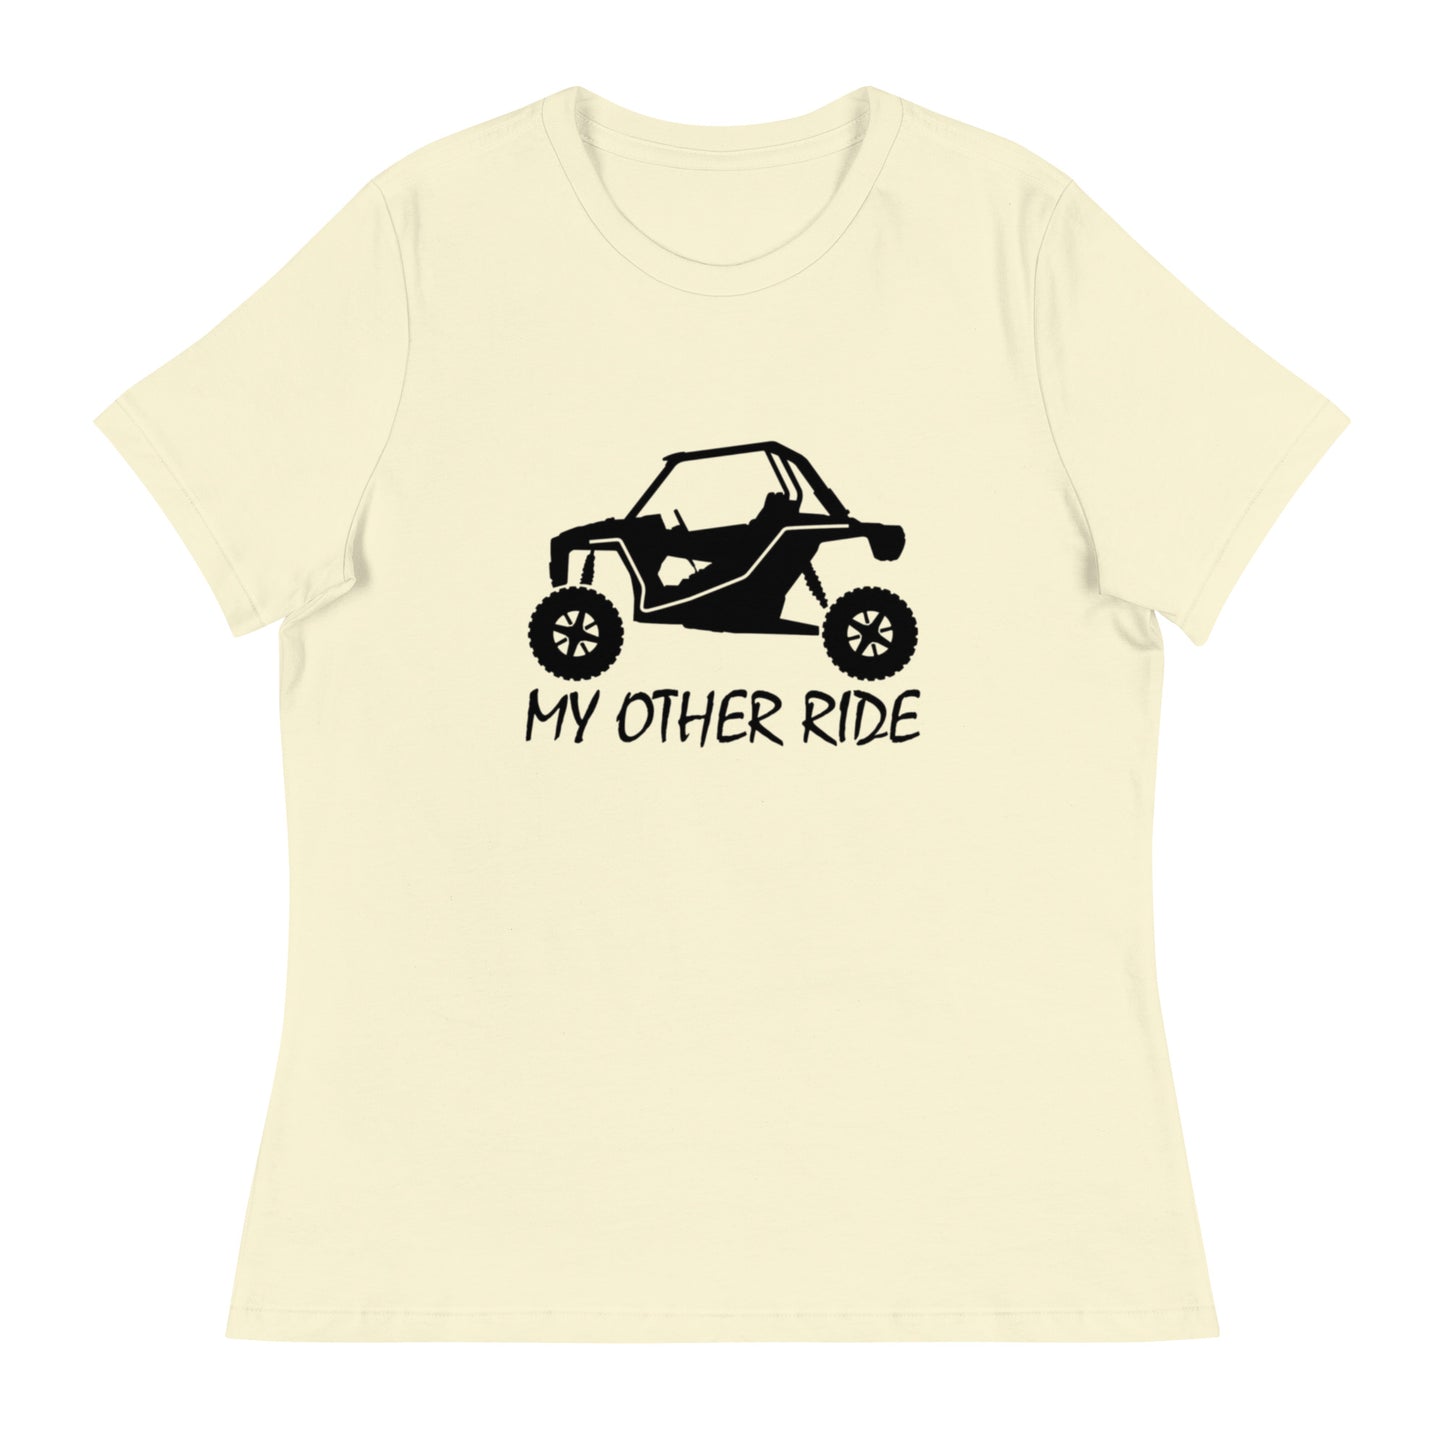 My Other Ride women's tee